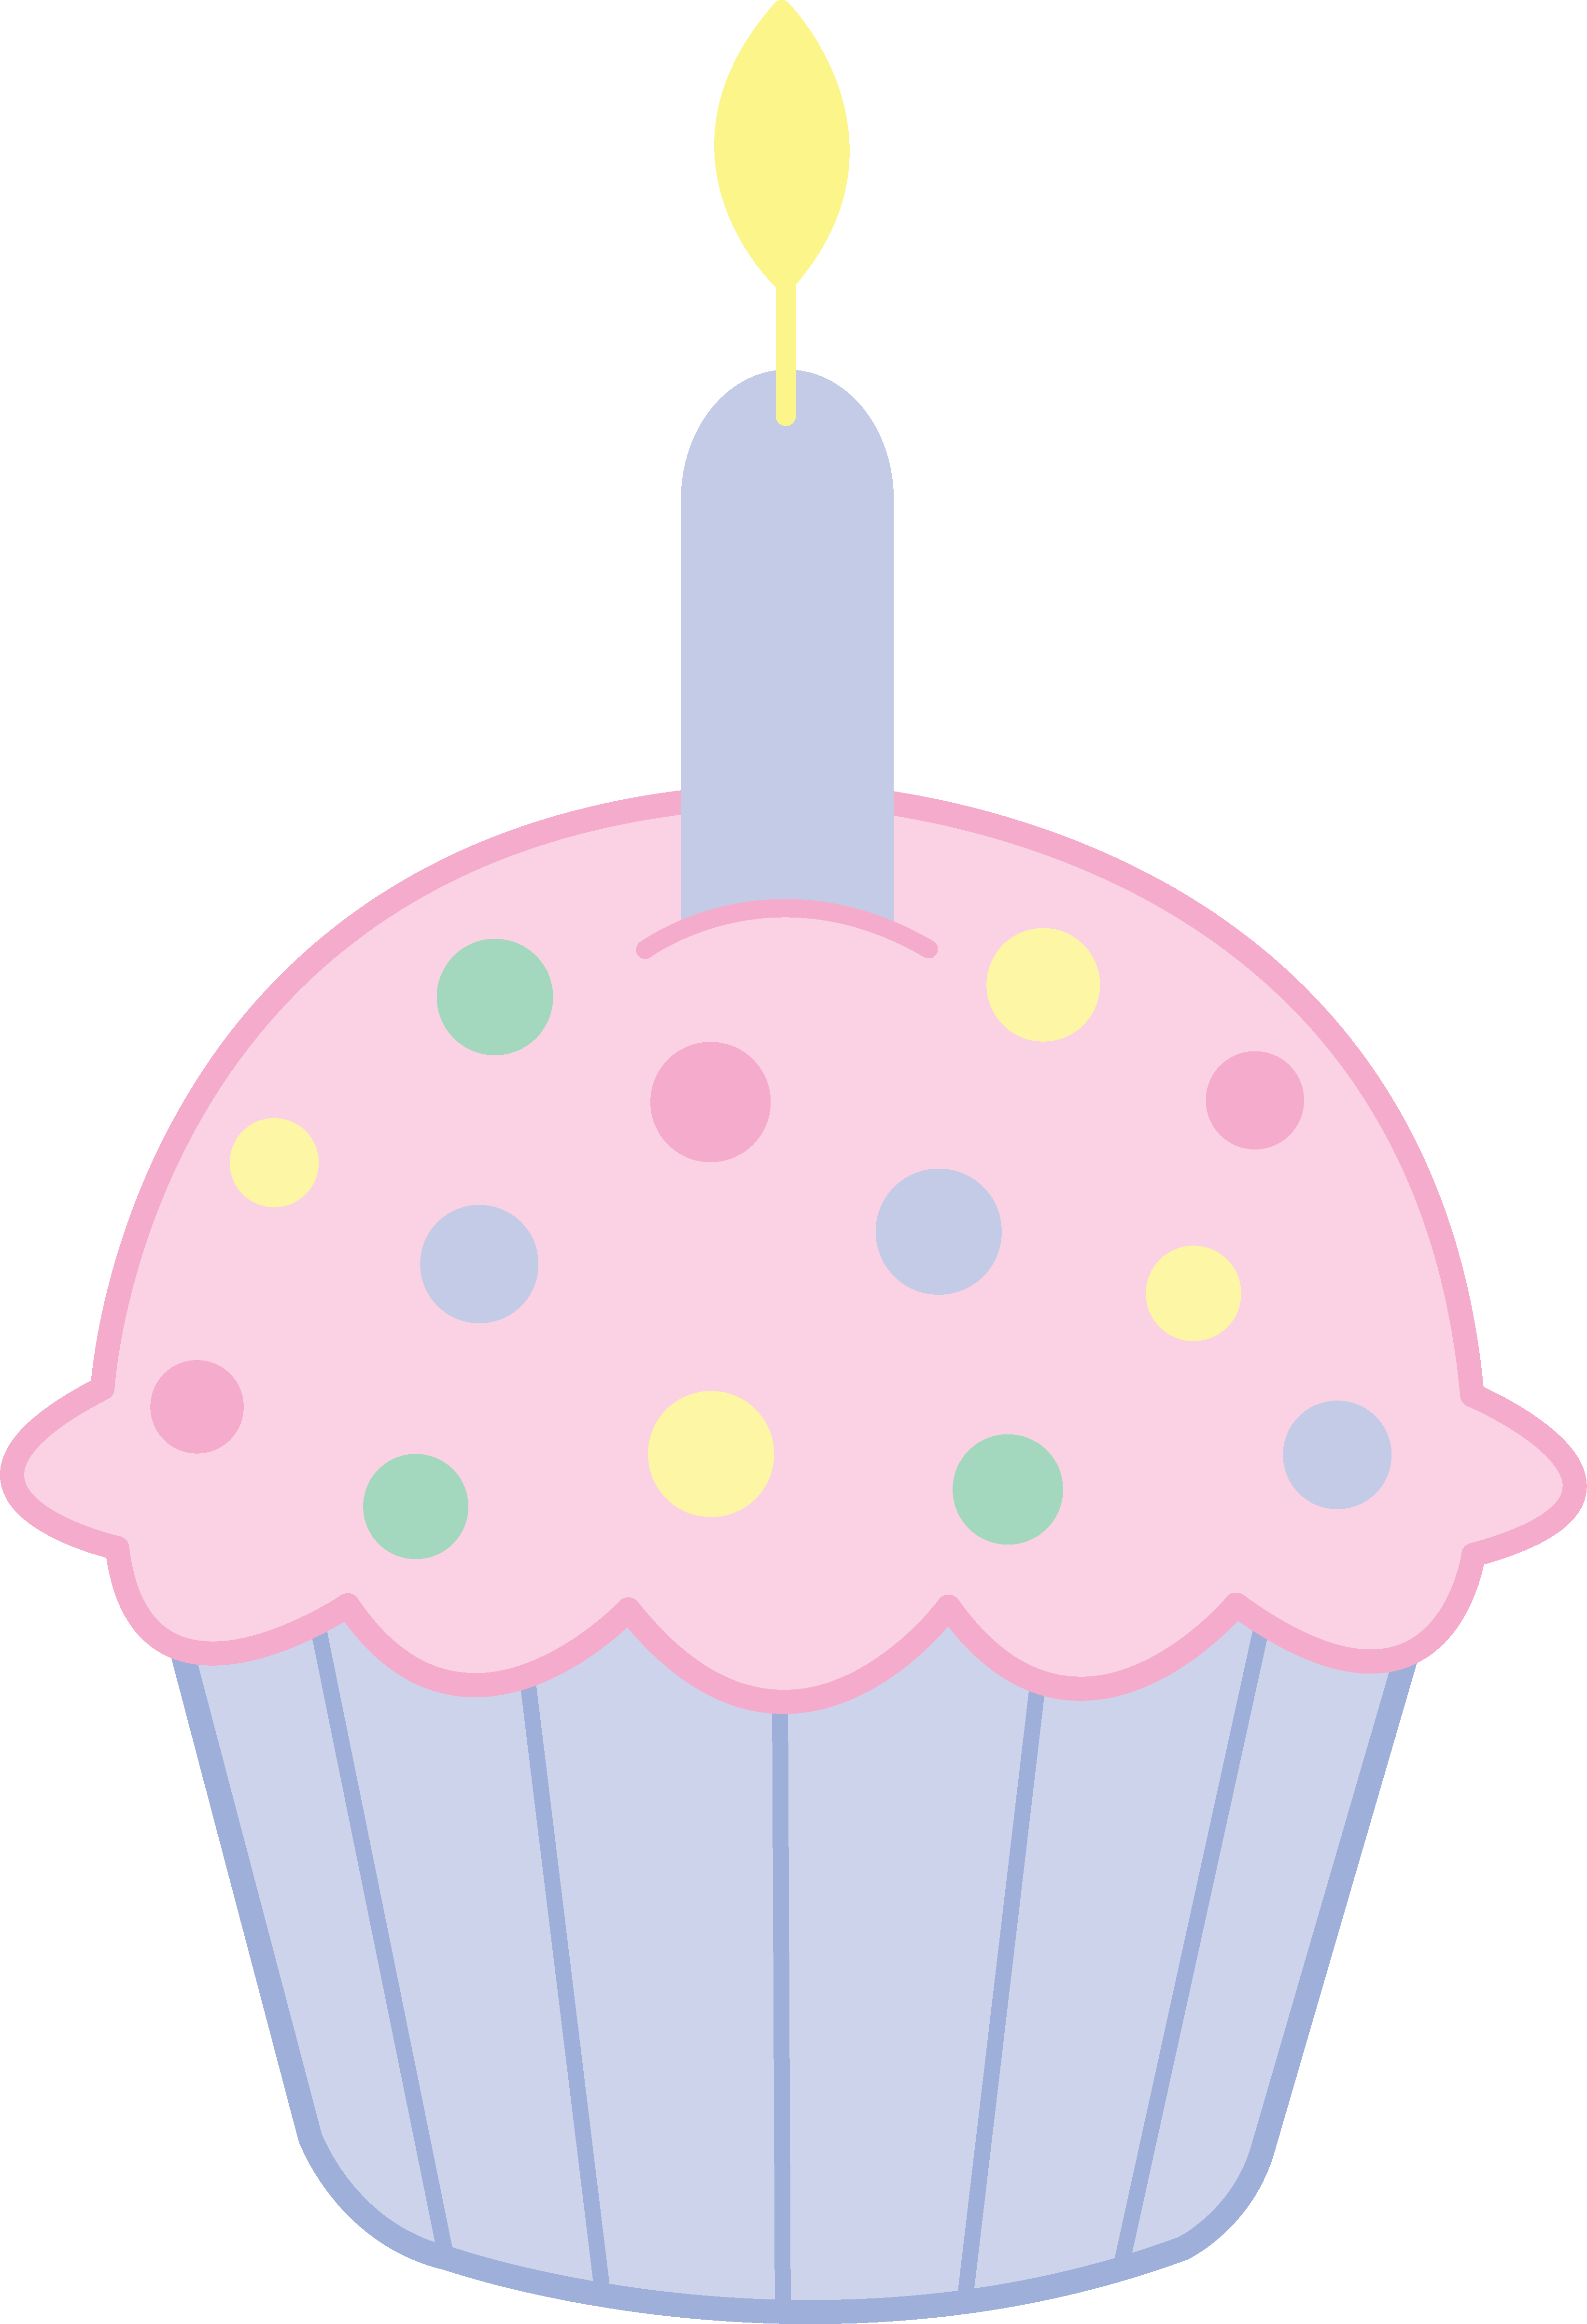 Cupcake art on clip art cupcake and pink cupcakes 4 clipartcow